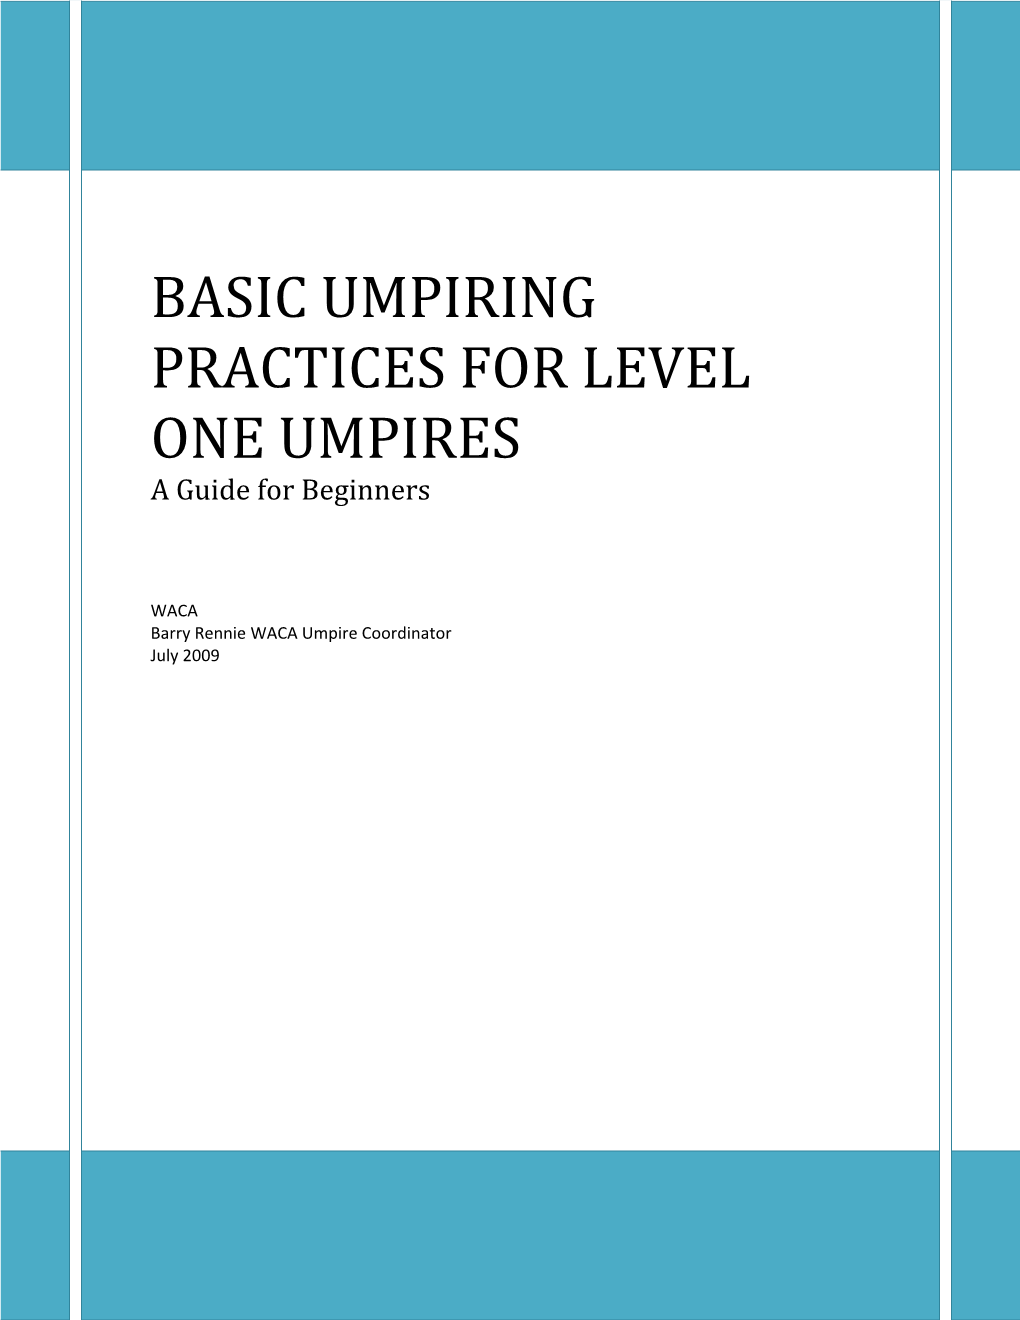 BASIC UMPIRING PRACTICES for LEVEL ONE UMPIRES a Guide for Beginners